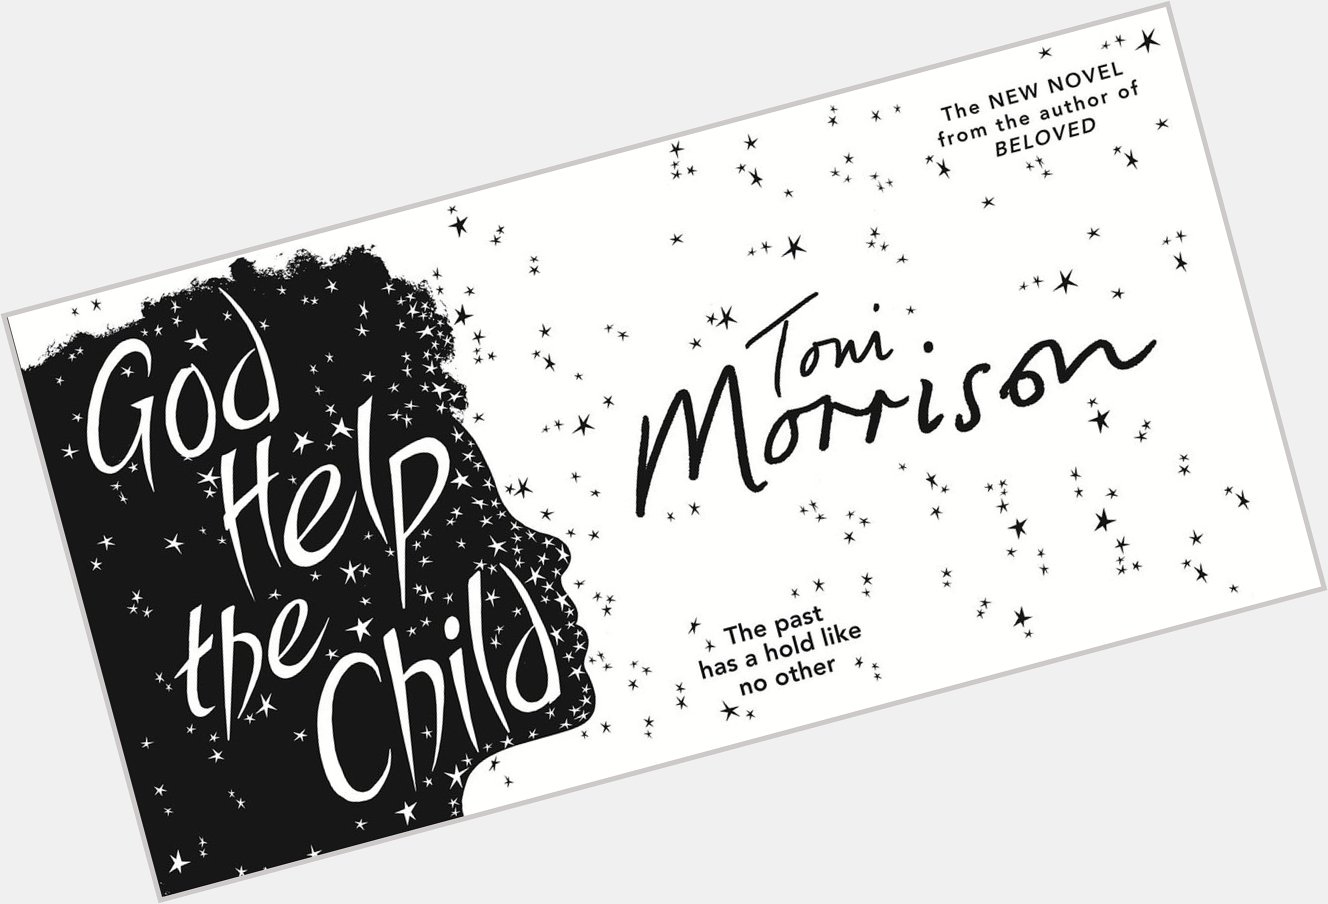 Happy birthday to Toni Morrison! Have you read Morrison\s latest book, GOD HELP THE CHILD?  